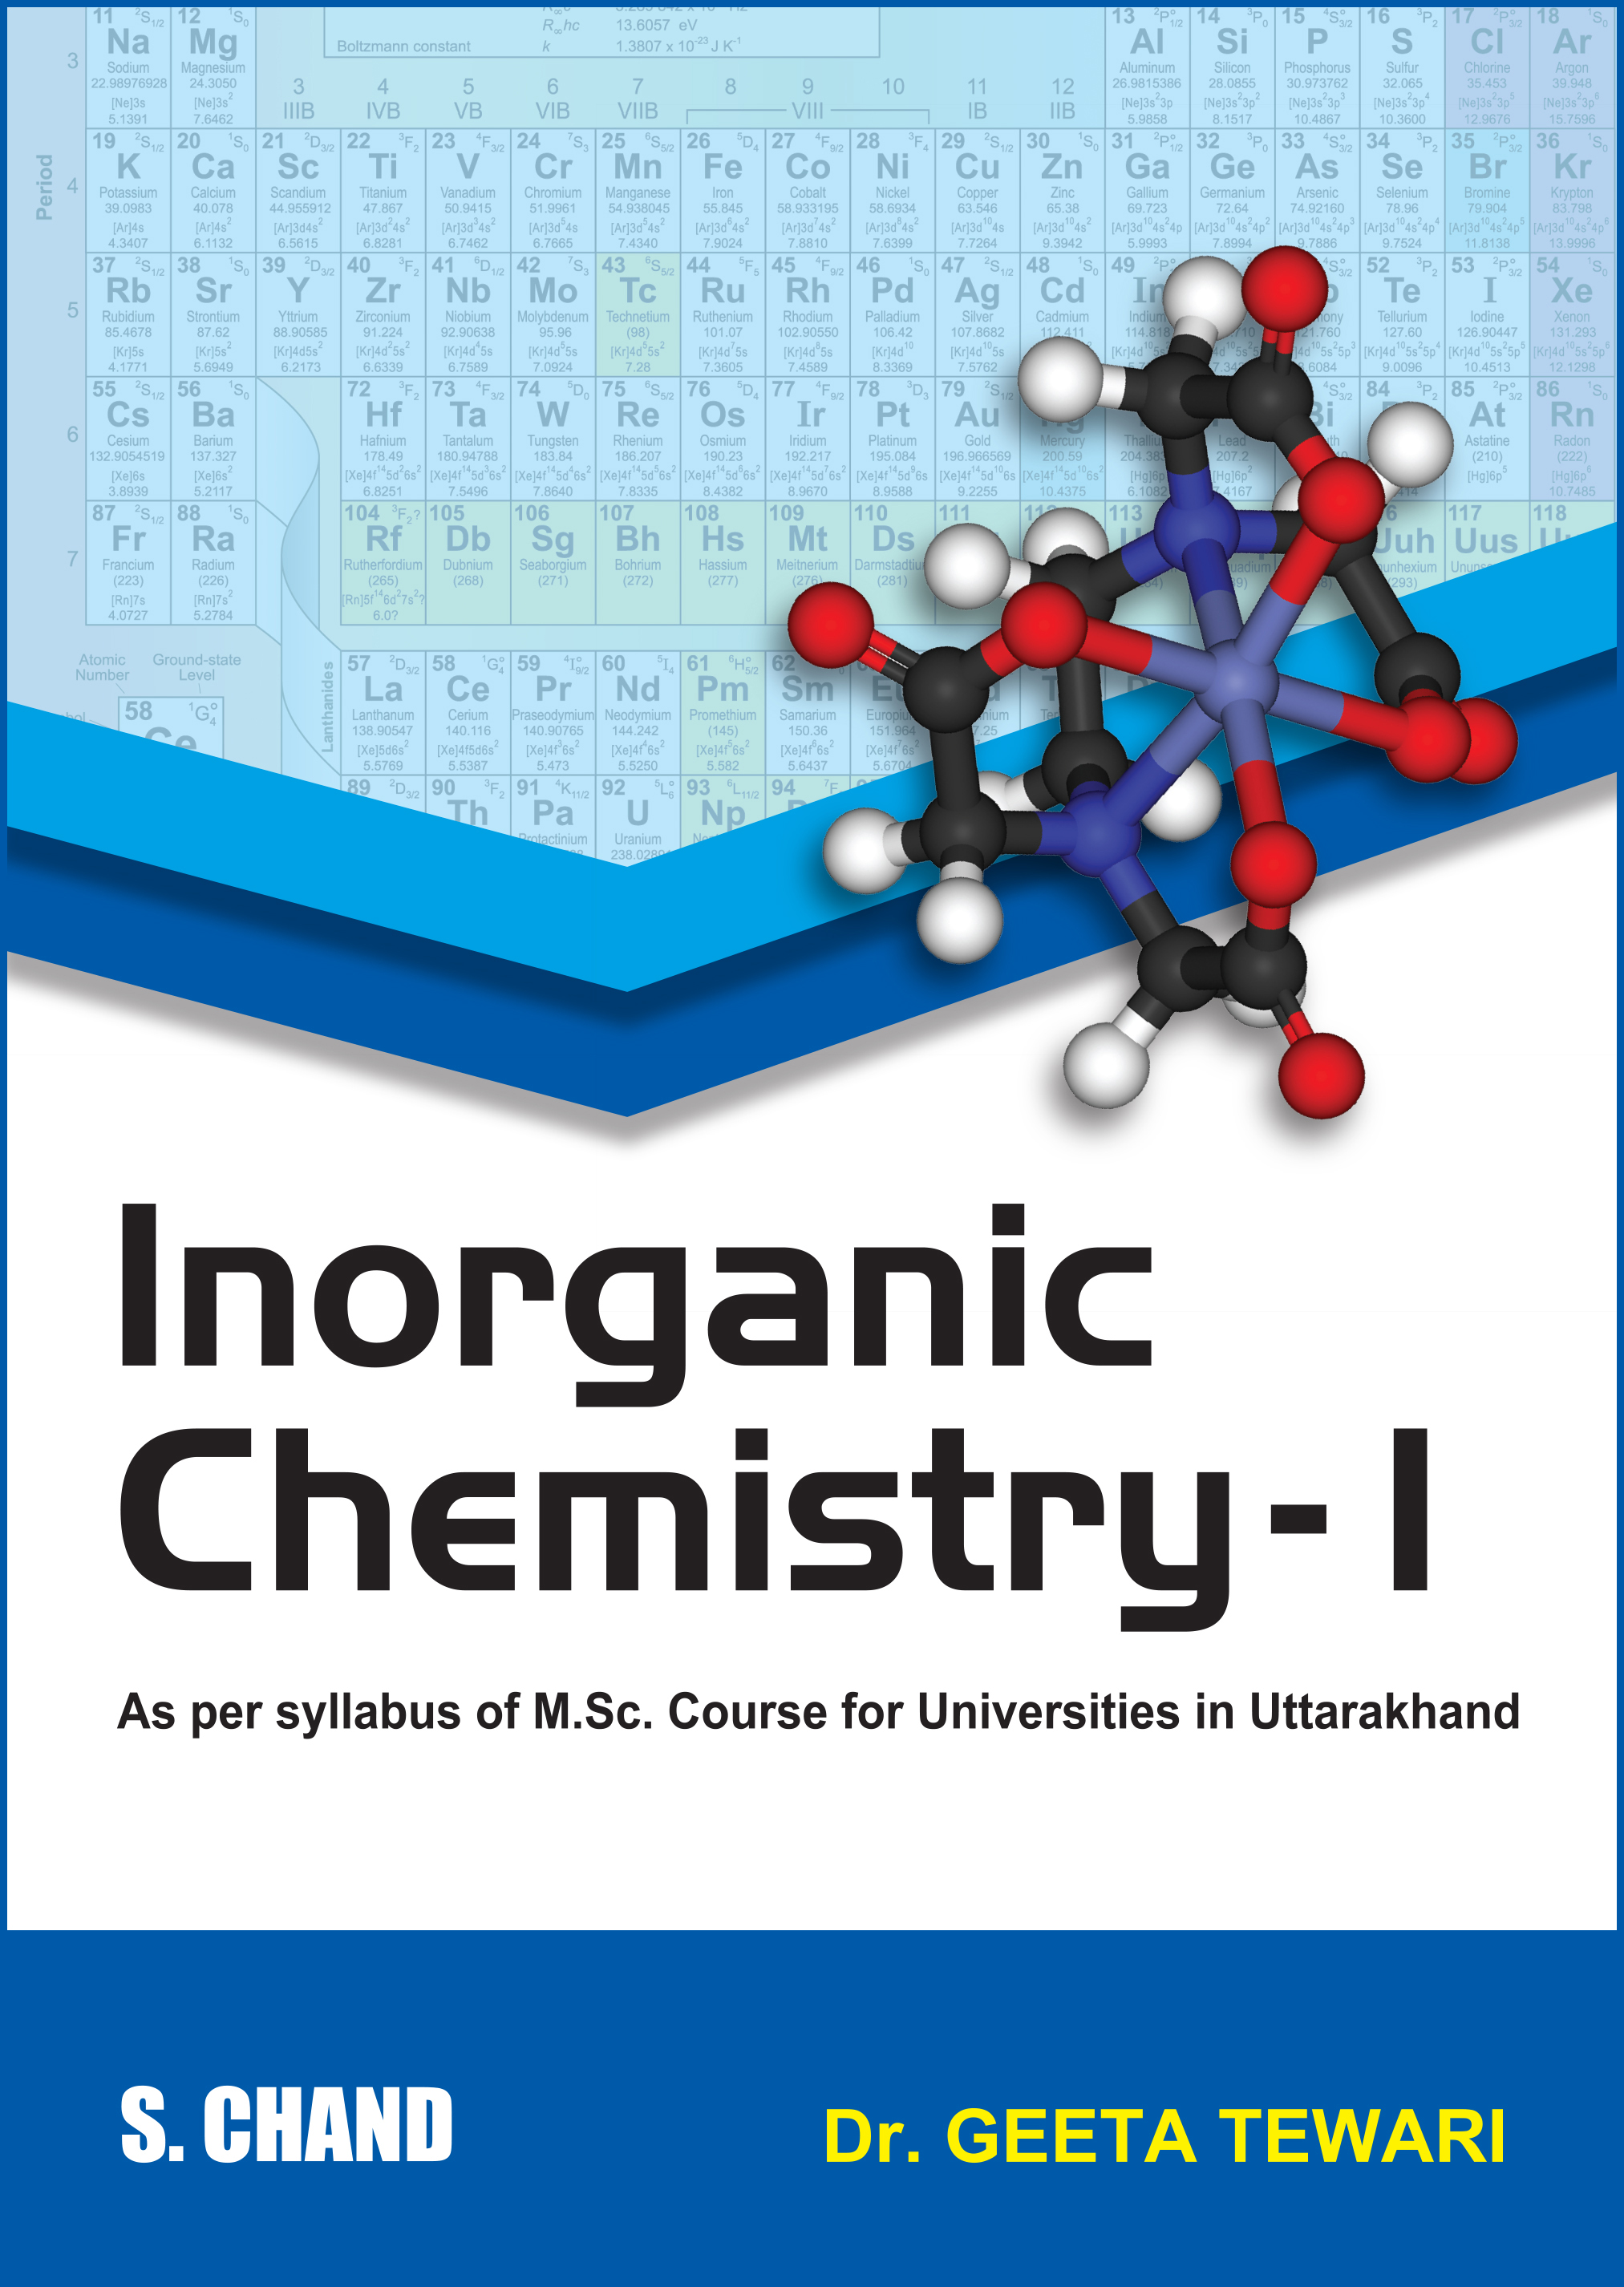 inorganic chemistry periodic table related short definitions